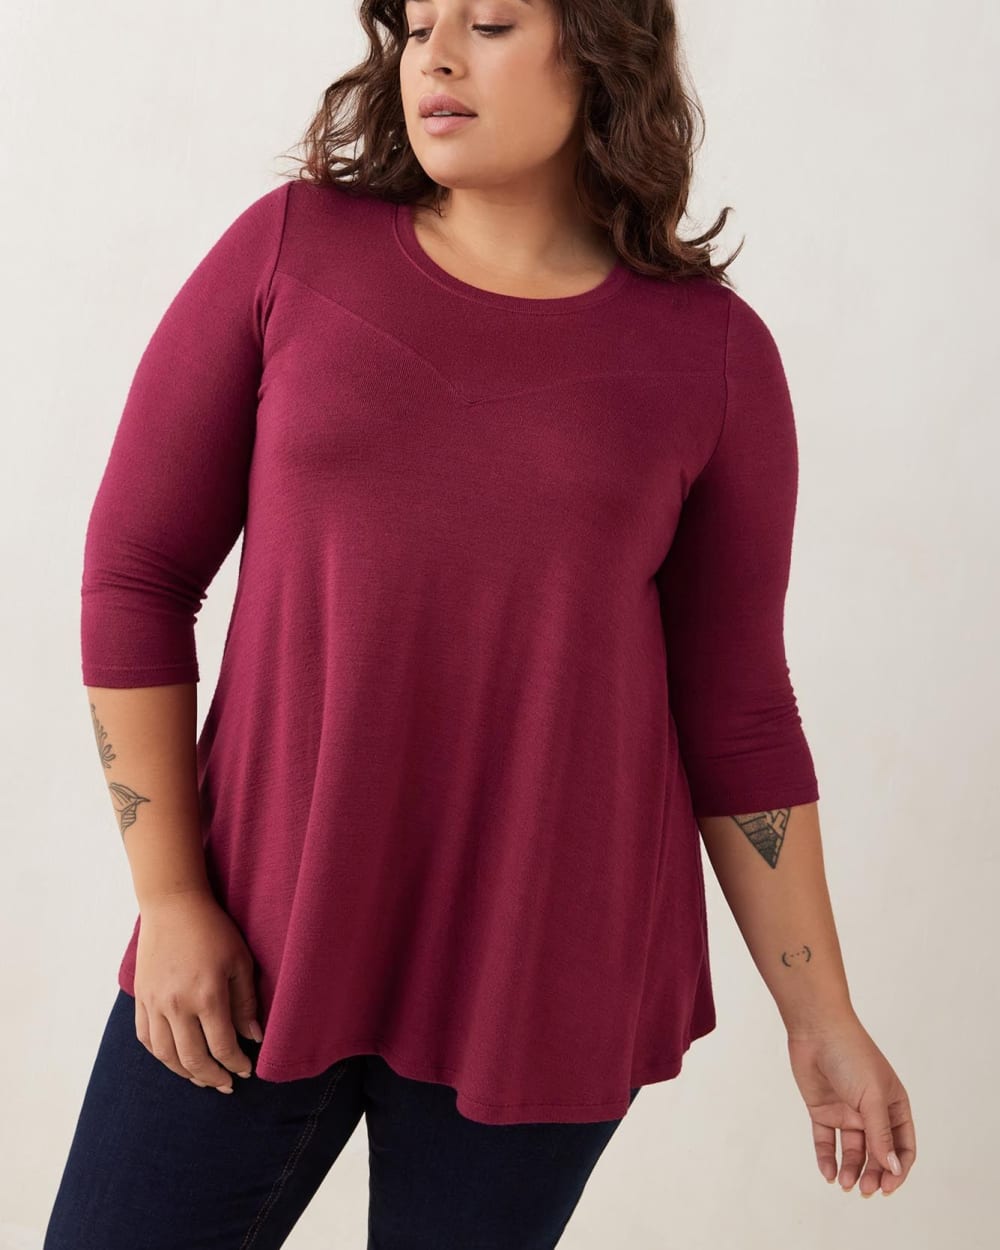 Solid 3/4-Sleeve Top with V-Cut Detail